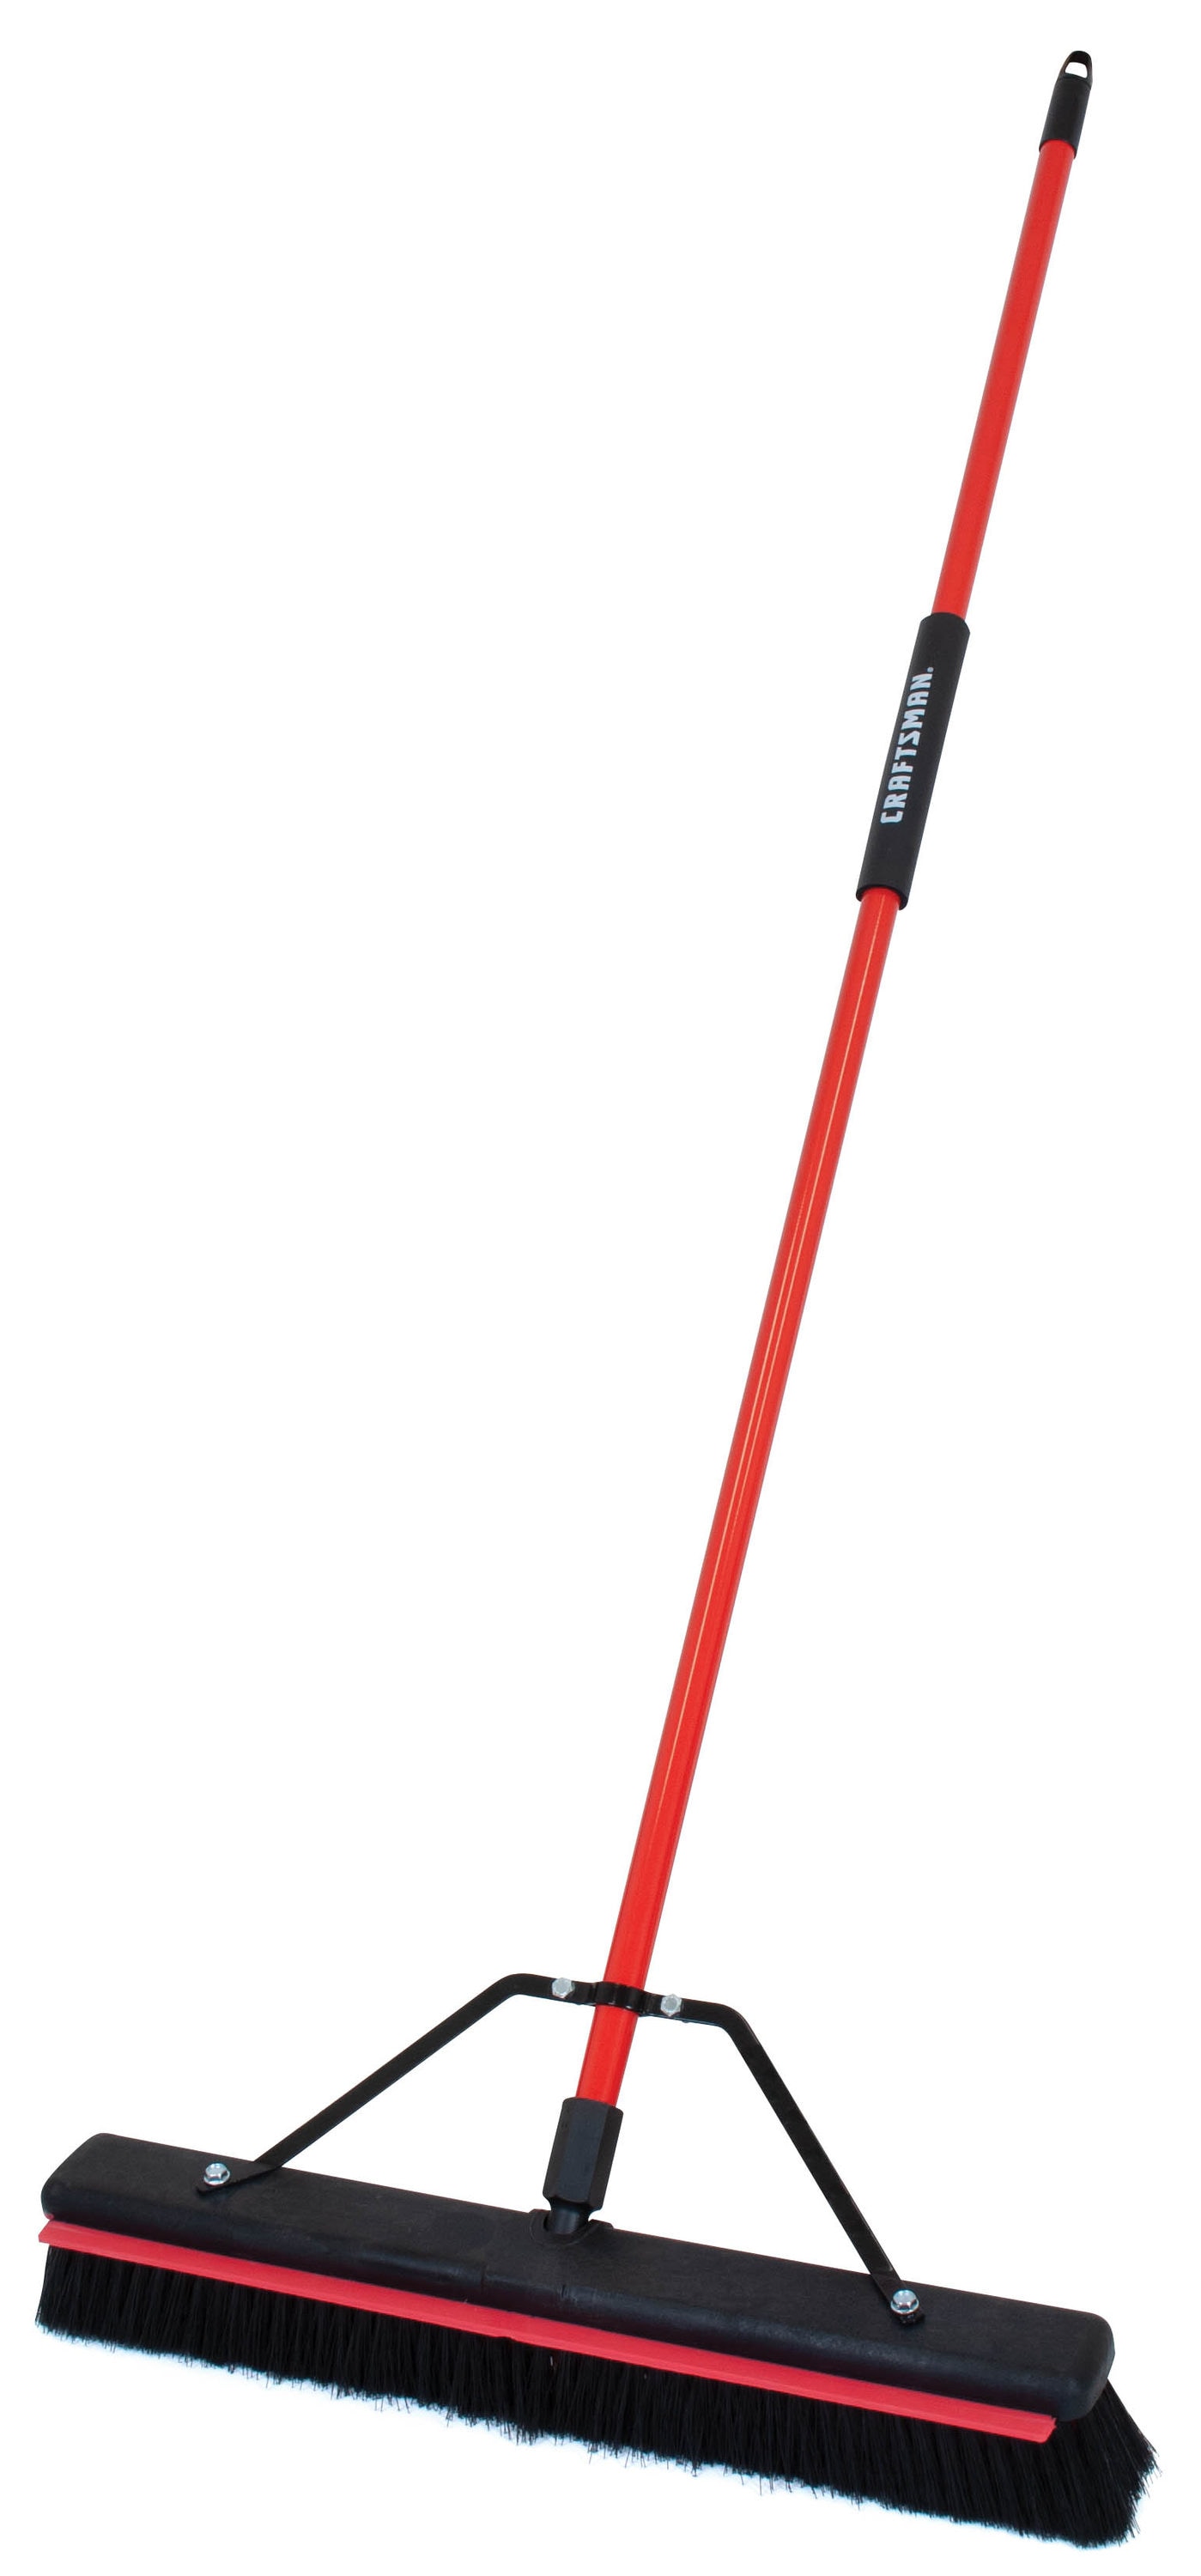 CRAFTSMAN 24-in Poly Fiber Multi-surface 2-in-1 squeegee Push